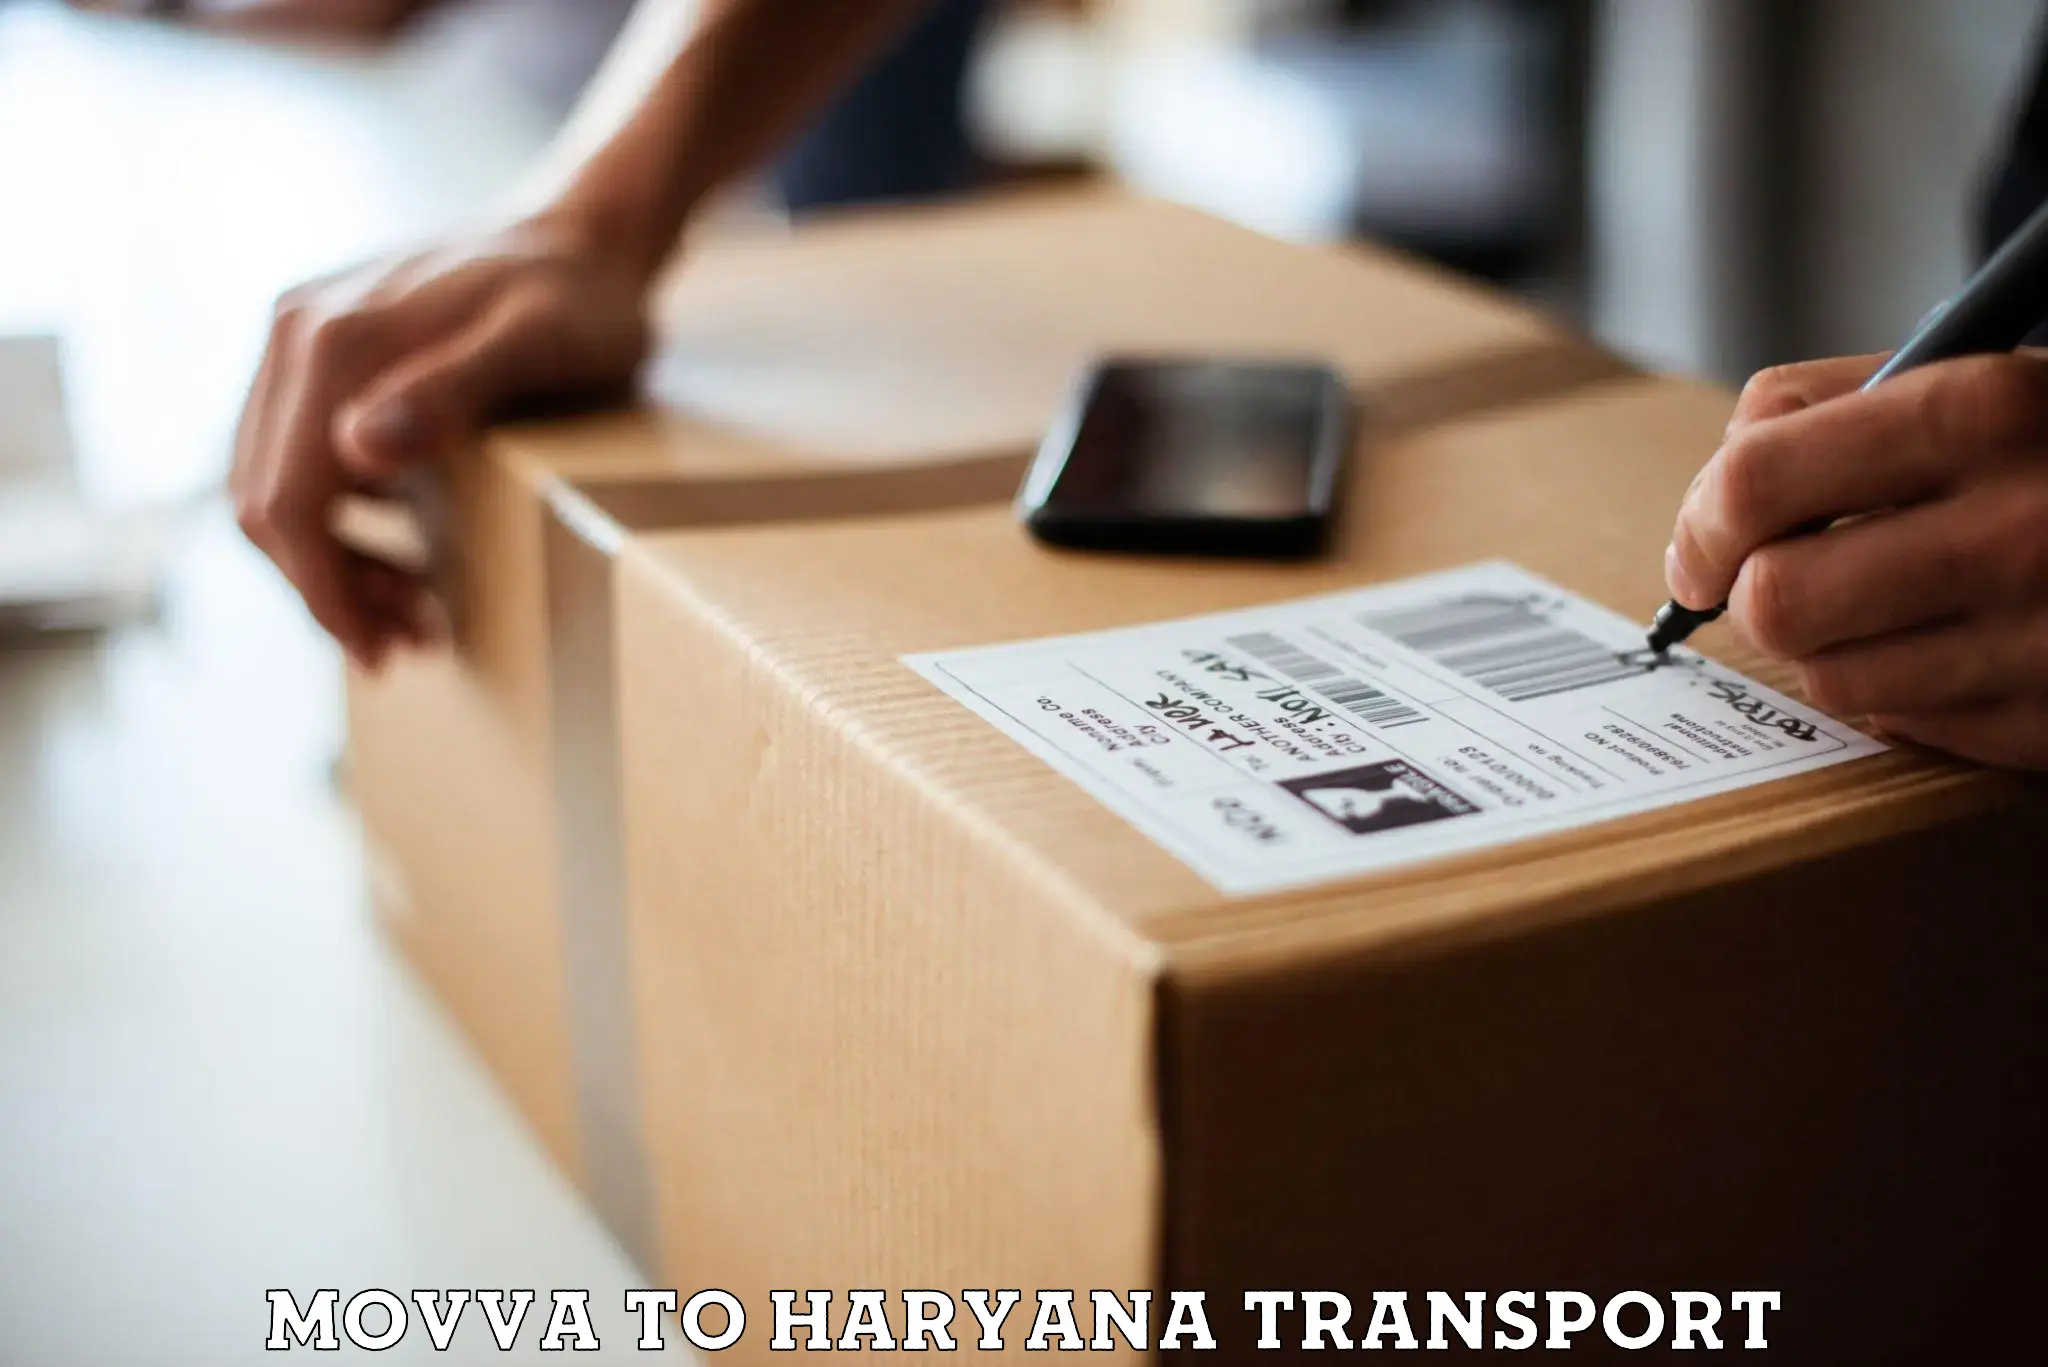 Container transport service Movva to Gurgaon